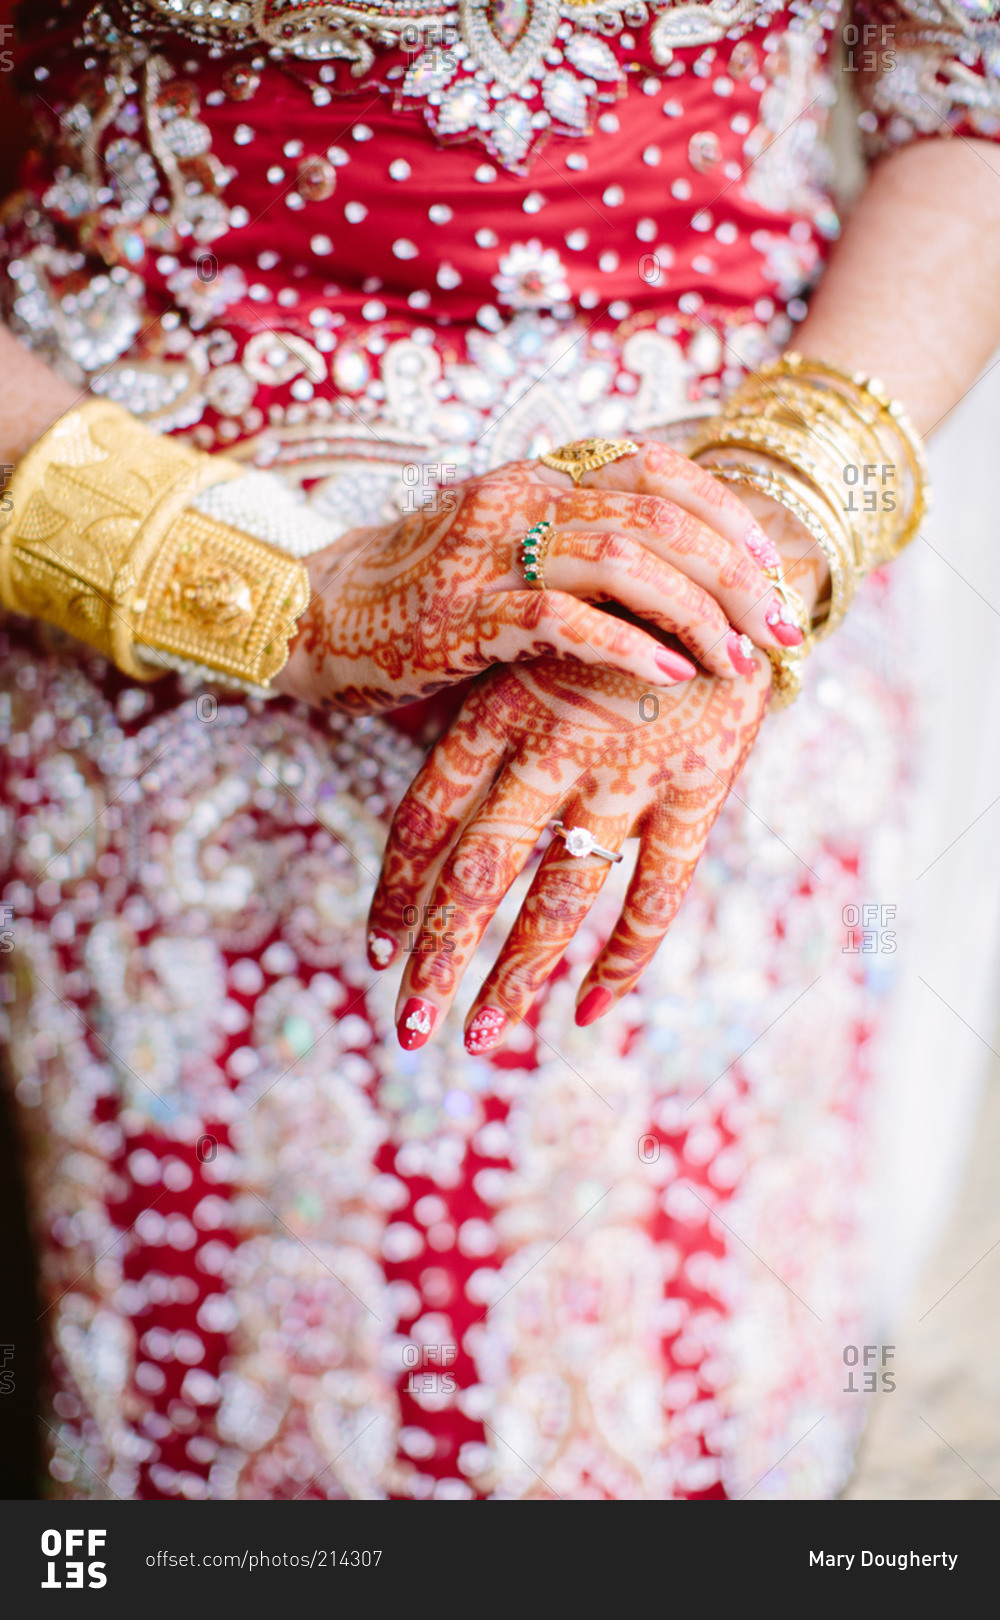 Jewelries on the hands of an Indian bride